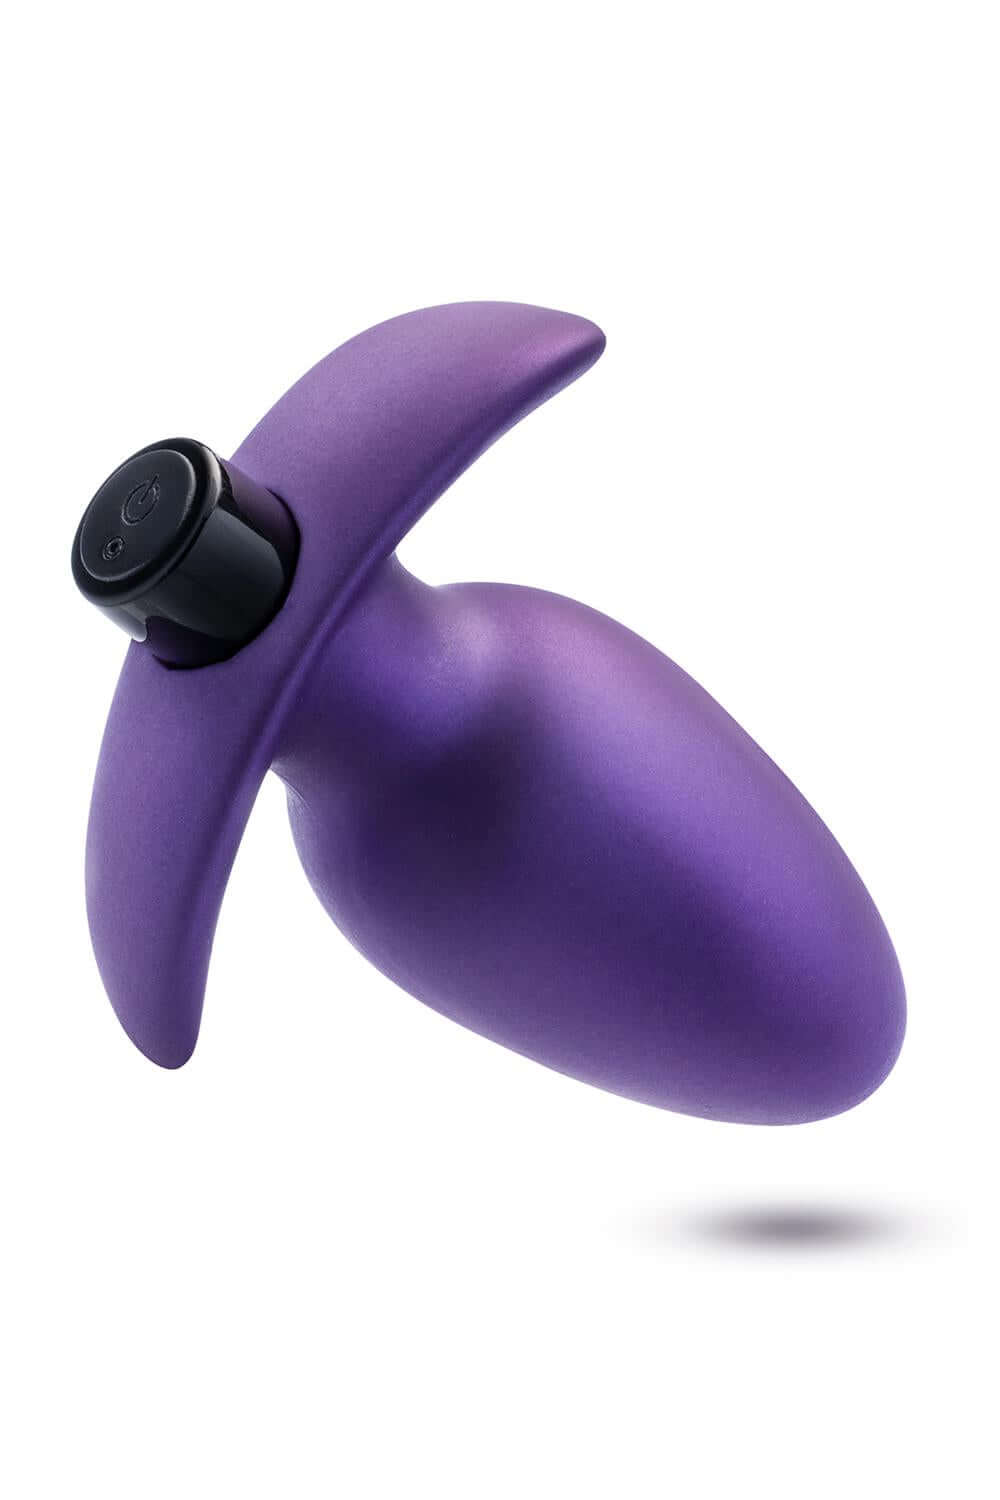 Anal Adventures Matrix Exceisor Rechargeable Body-safe Silicone Anal Plug